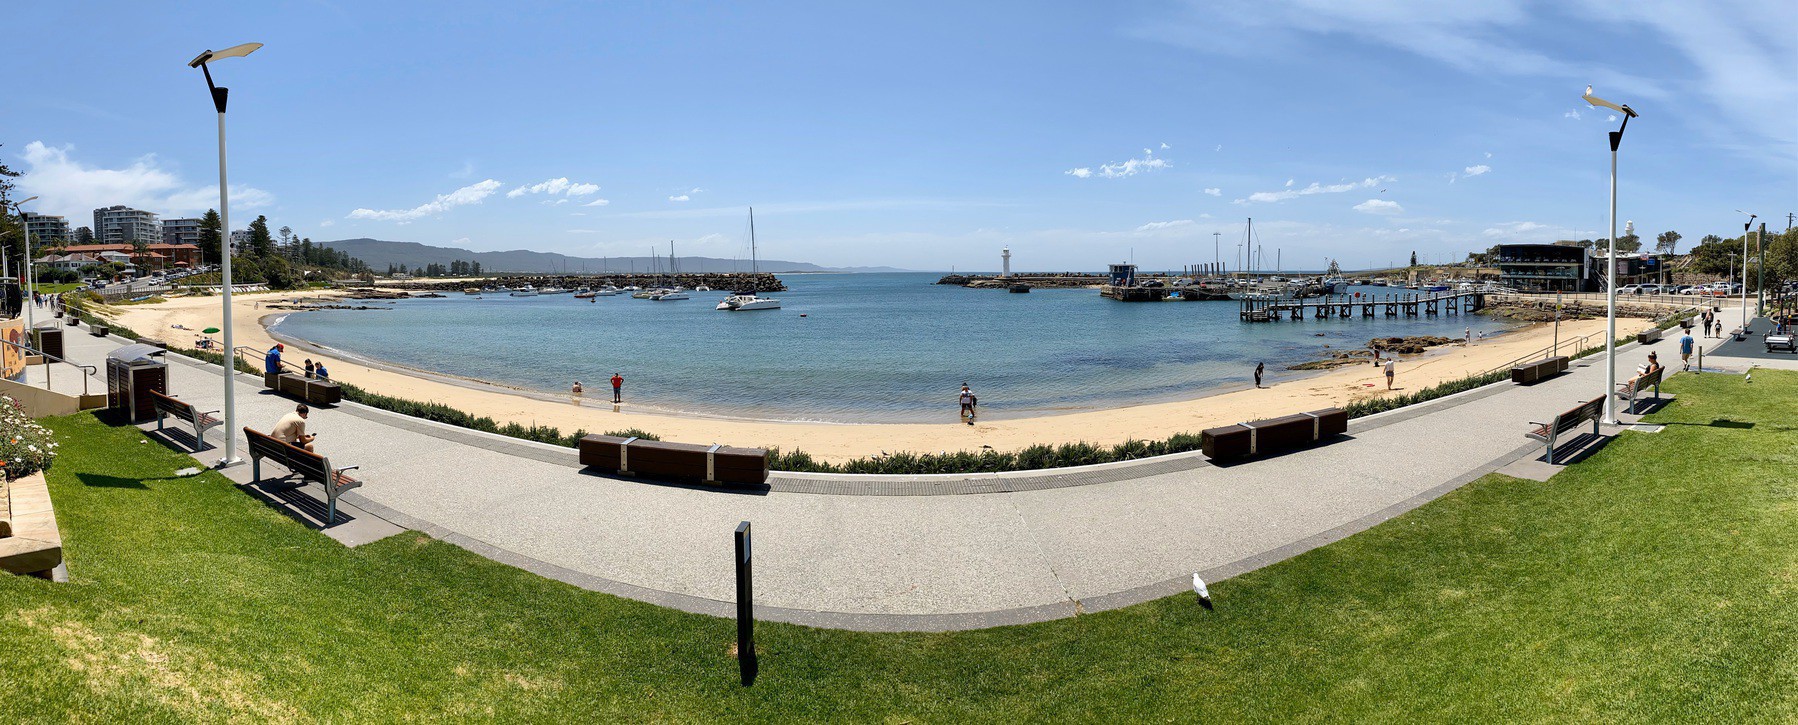 Panorama of a sunny day over the water, footpath and sand